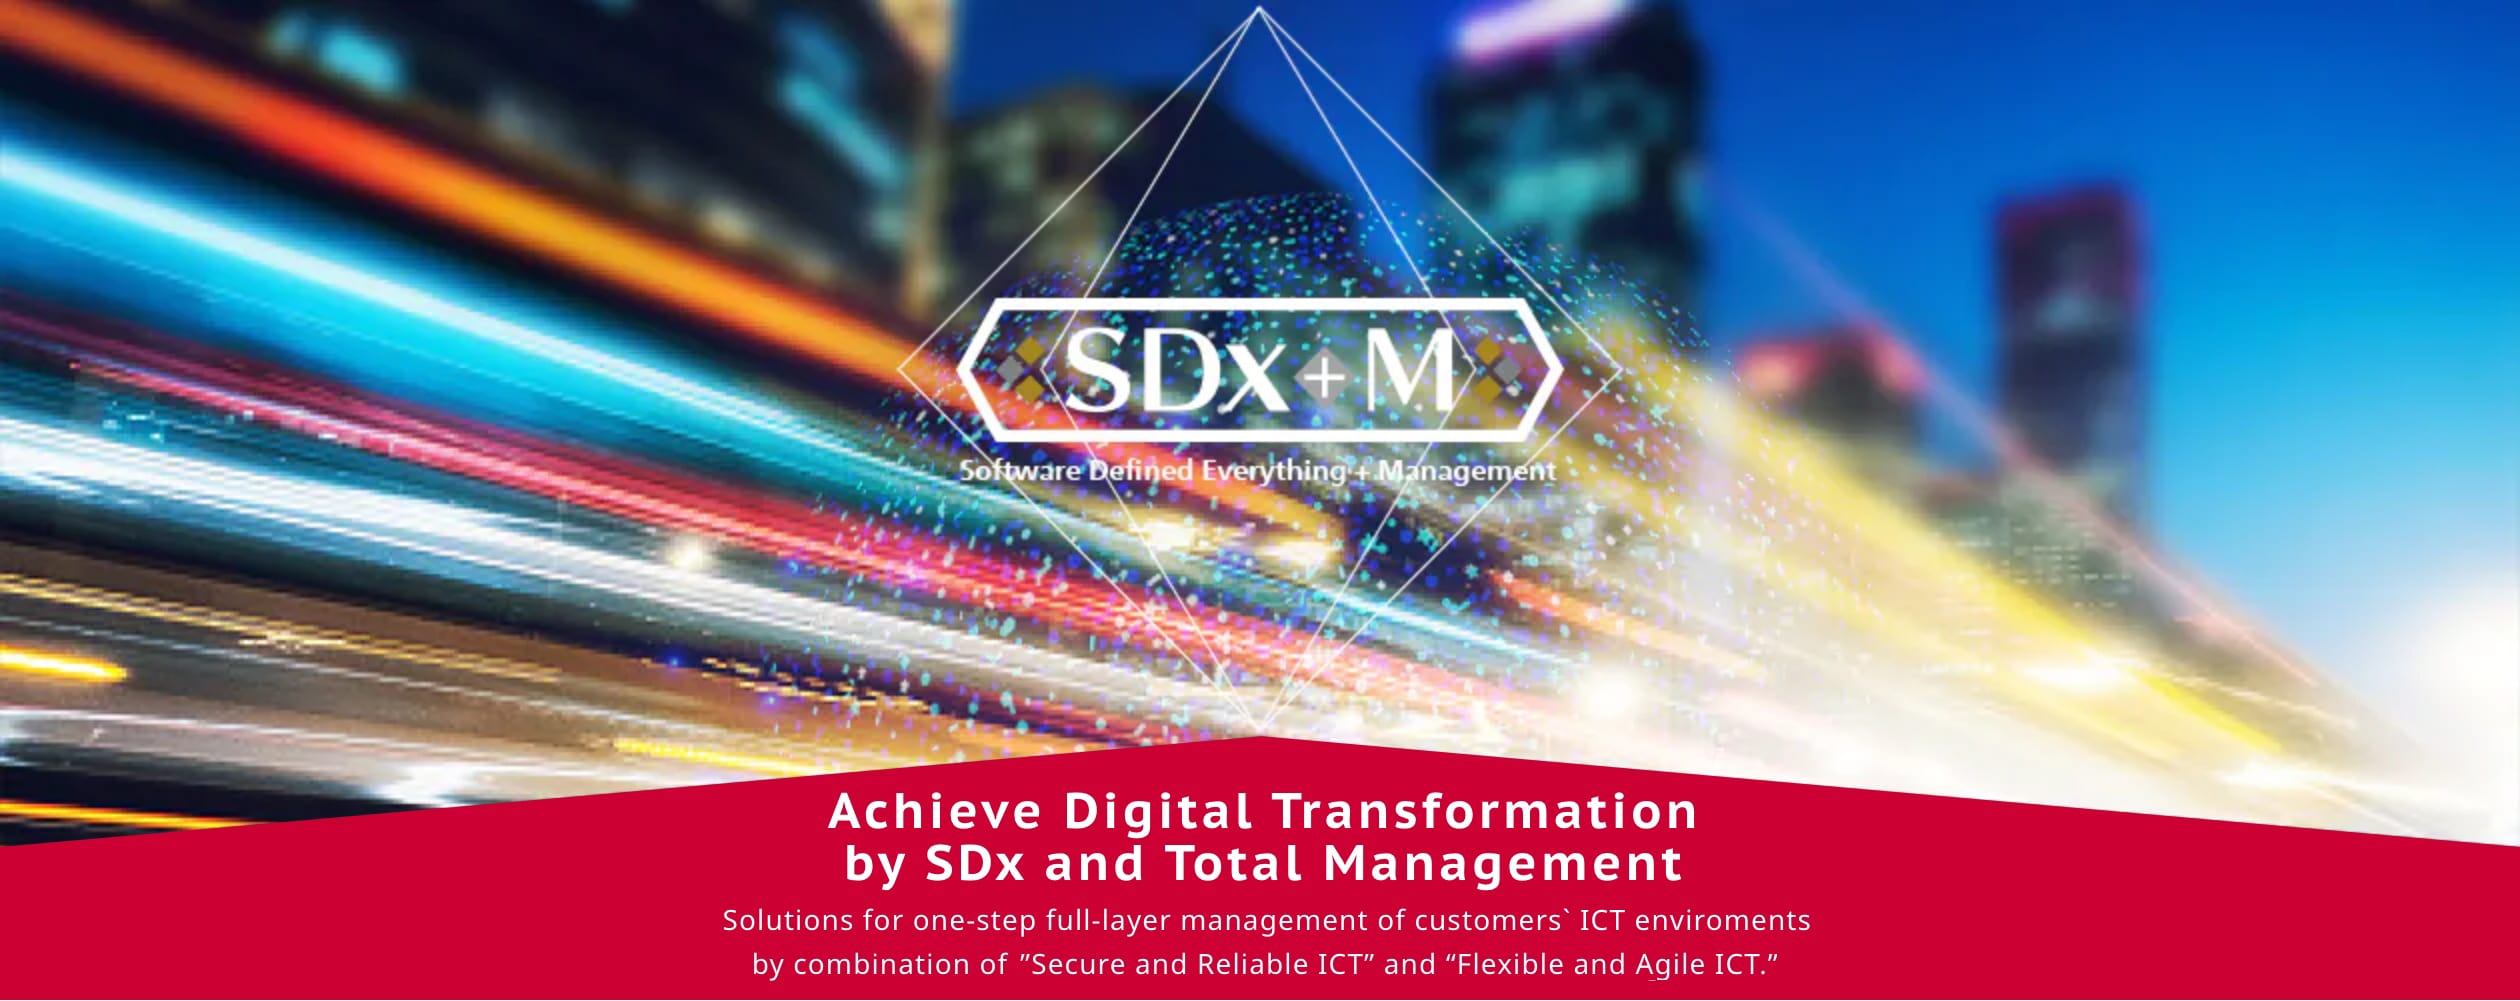 Achieve Digital Transformation by SDx and Total Management